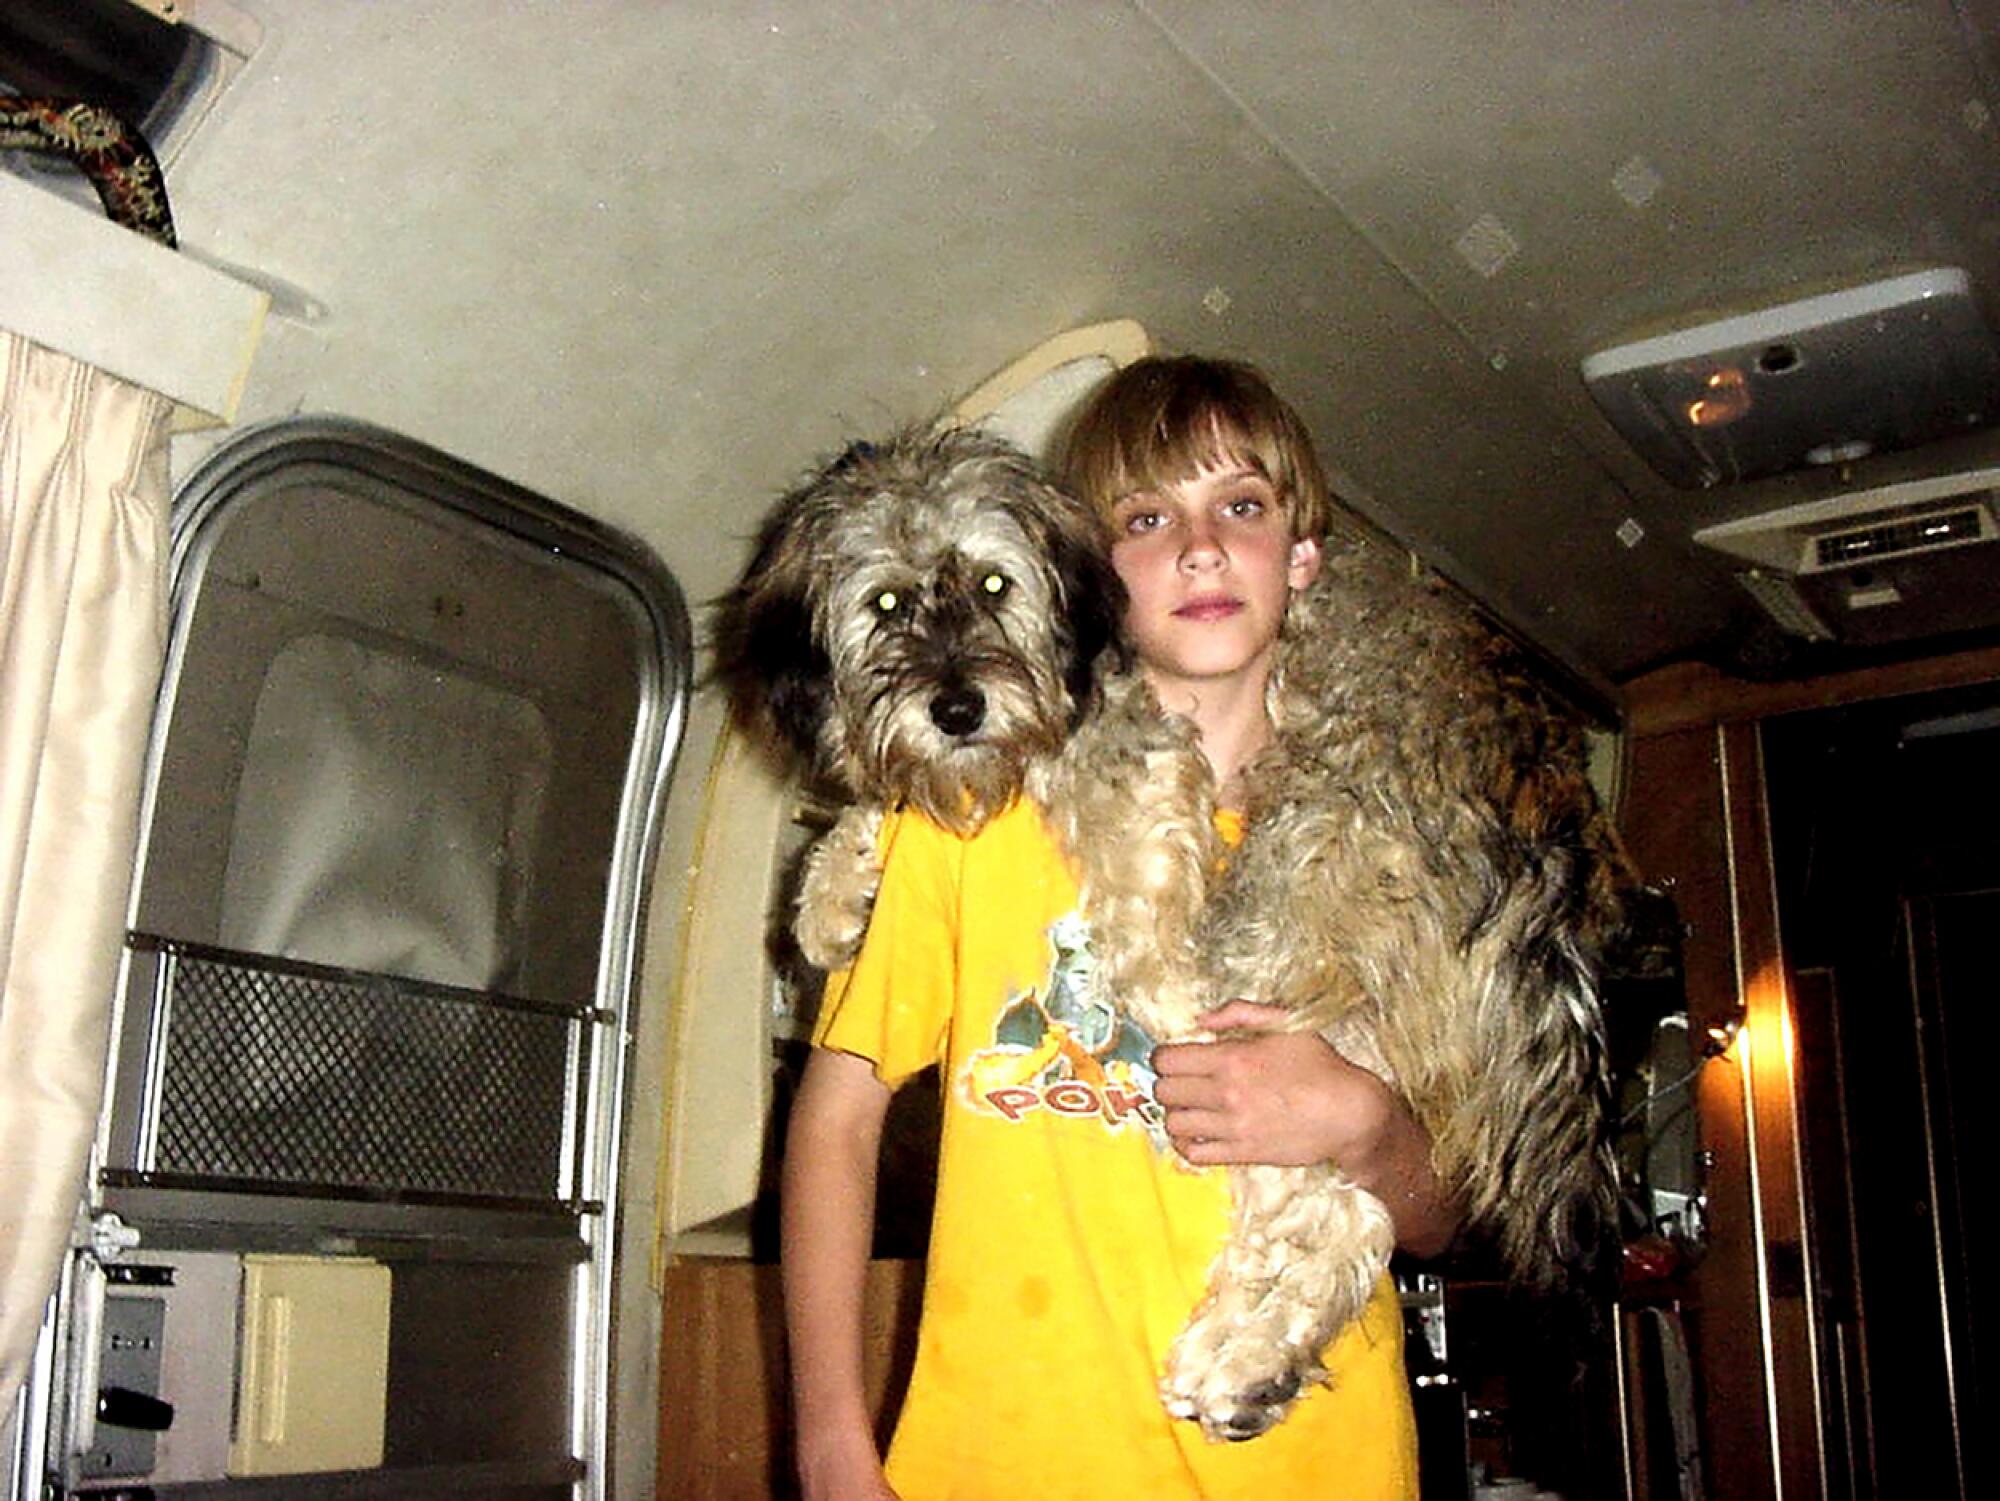 A childhood photo of Zo? Bossiere, in a yellow T-shirt, standing in an RV with a dog on their shoulders.